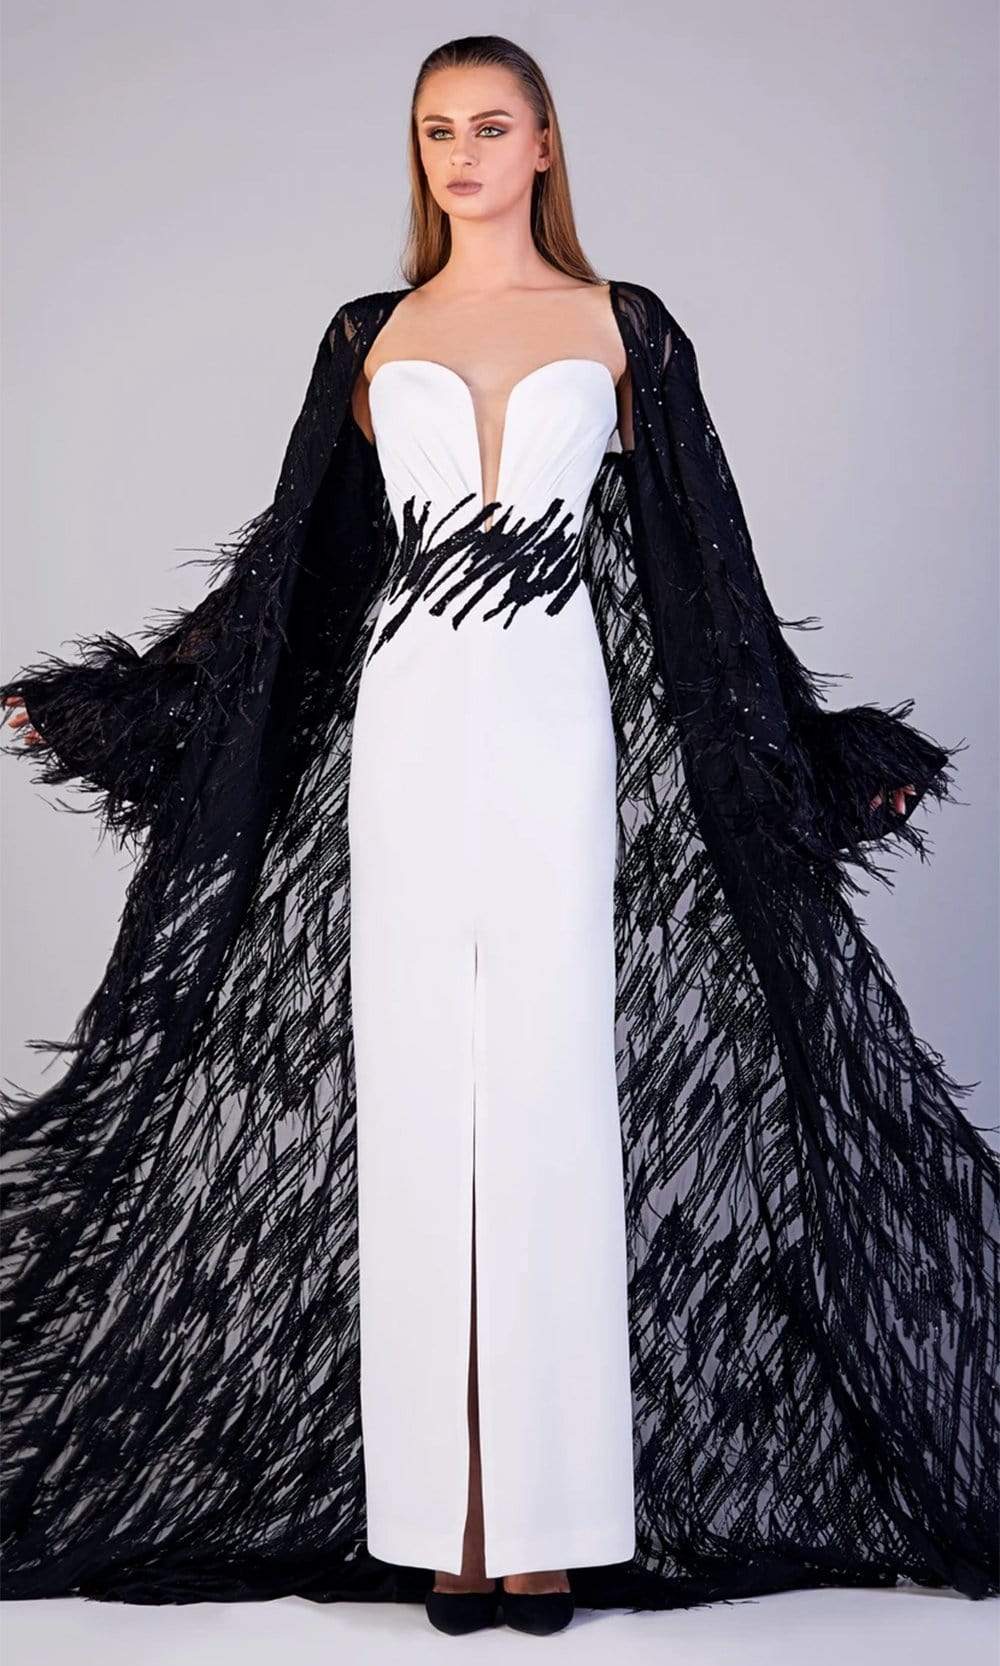 Gatti Nolli Couture - OP-5199 Strapless Gown with Feathered Jacket
